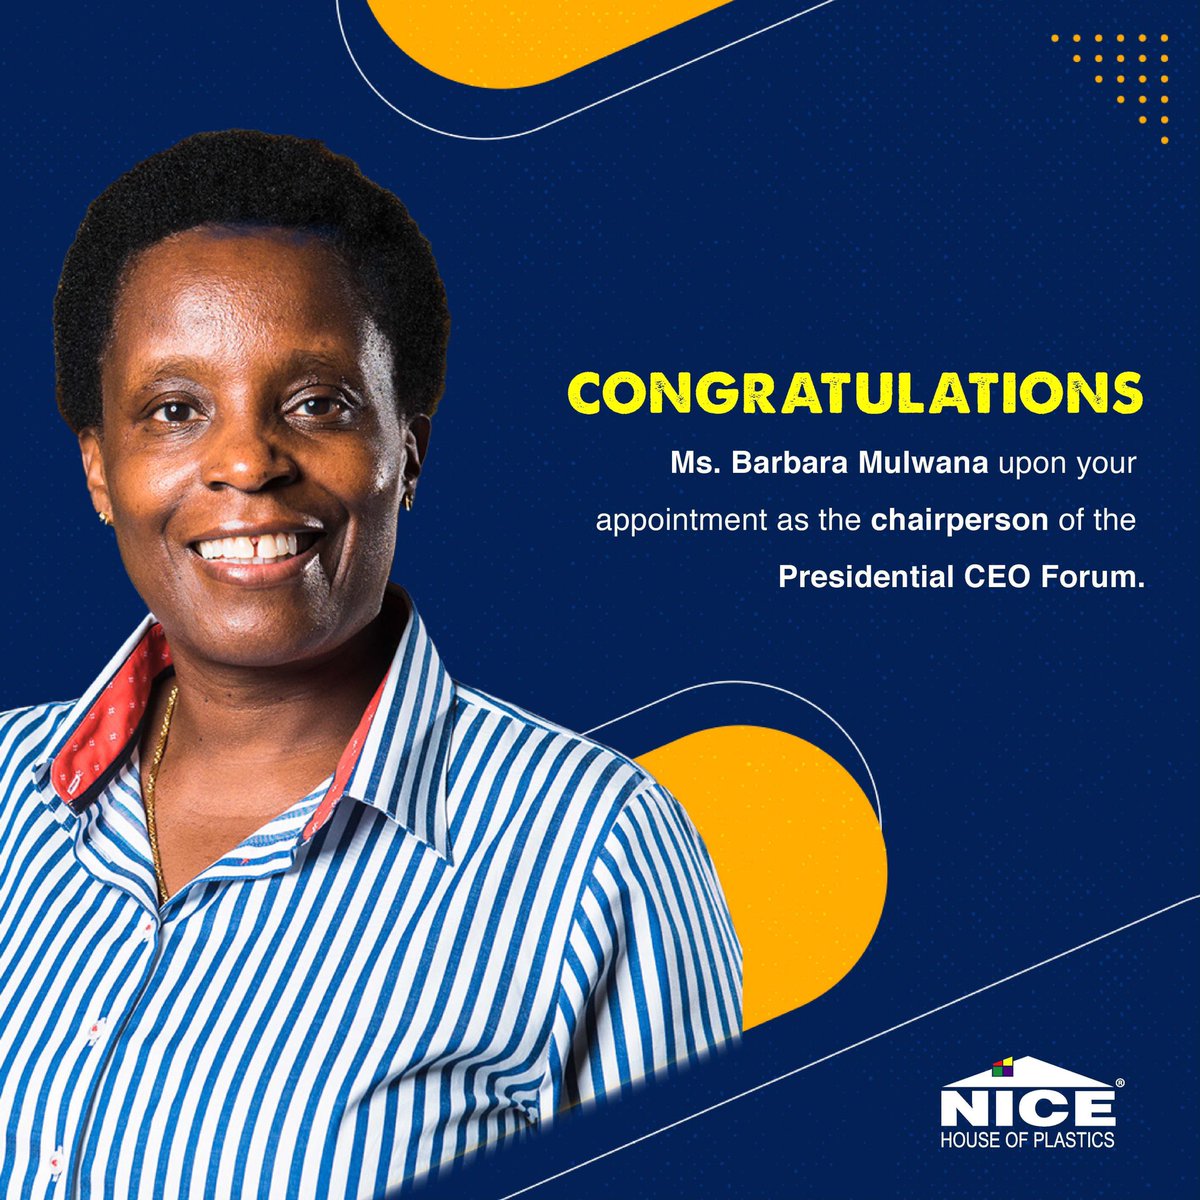 We are very proud of our ED, Barbara Mulwana who was nominated to join the Presidential CEO Forum, representing the manufacturing fraternity.
#CEOForum